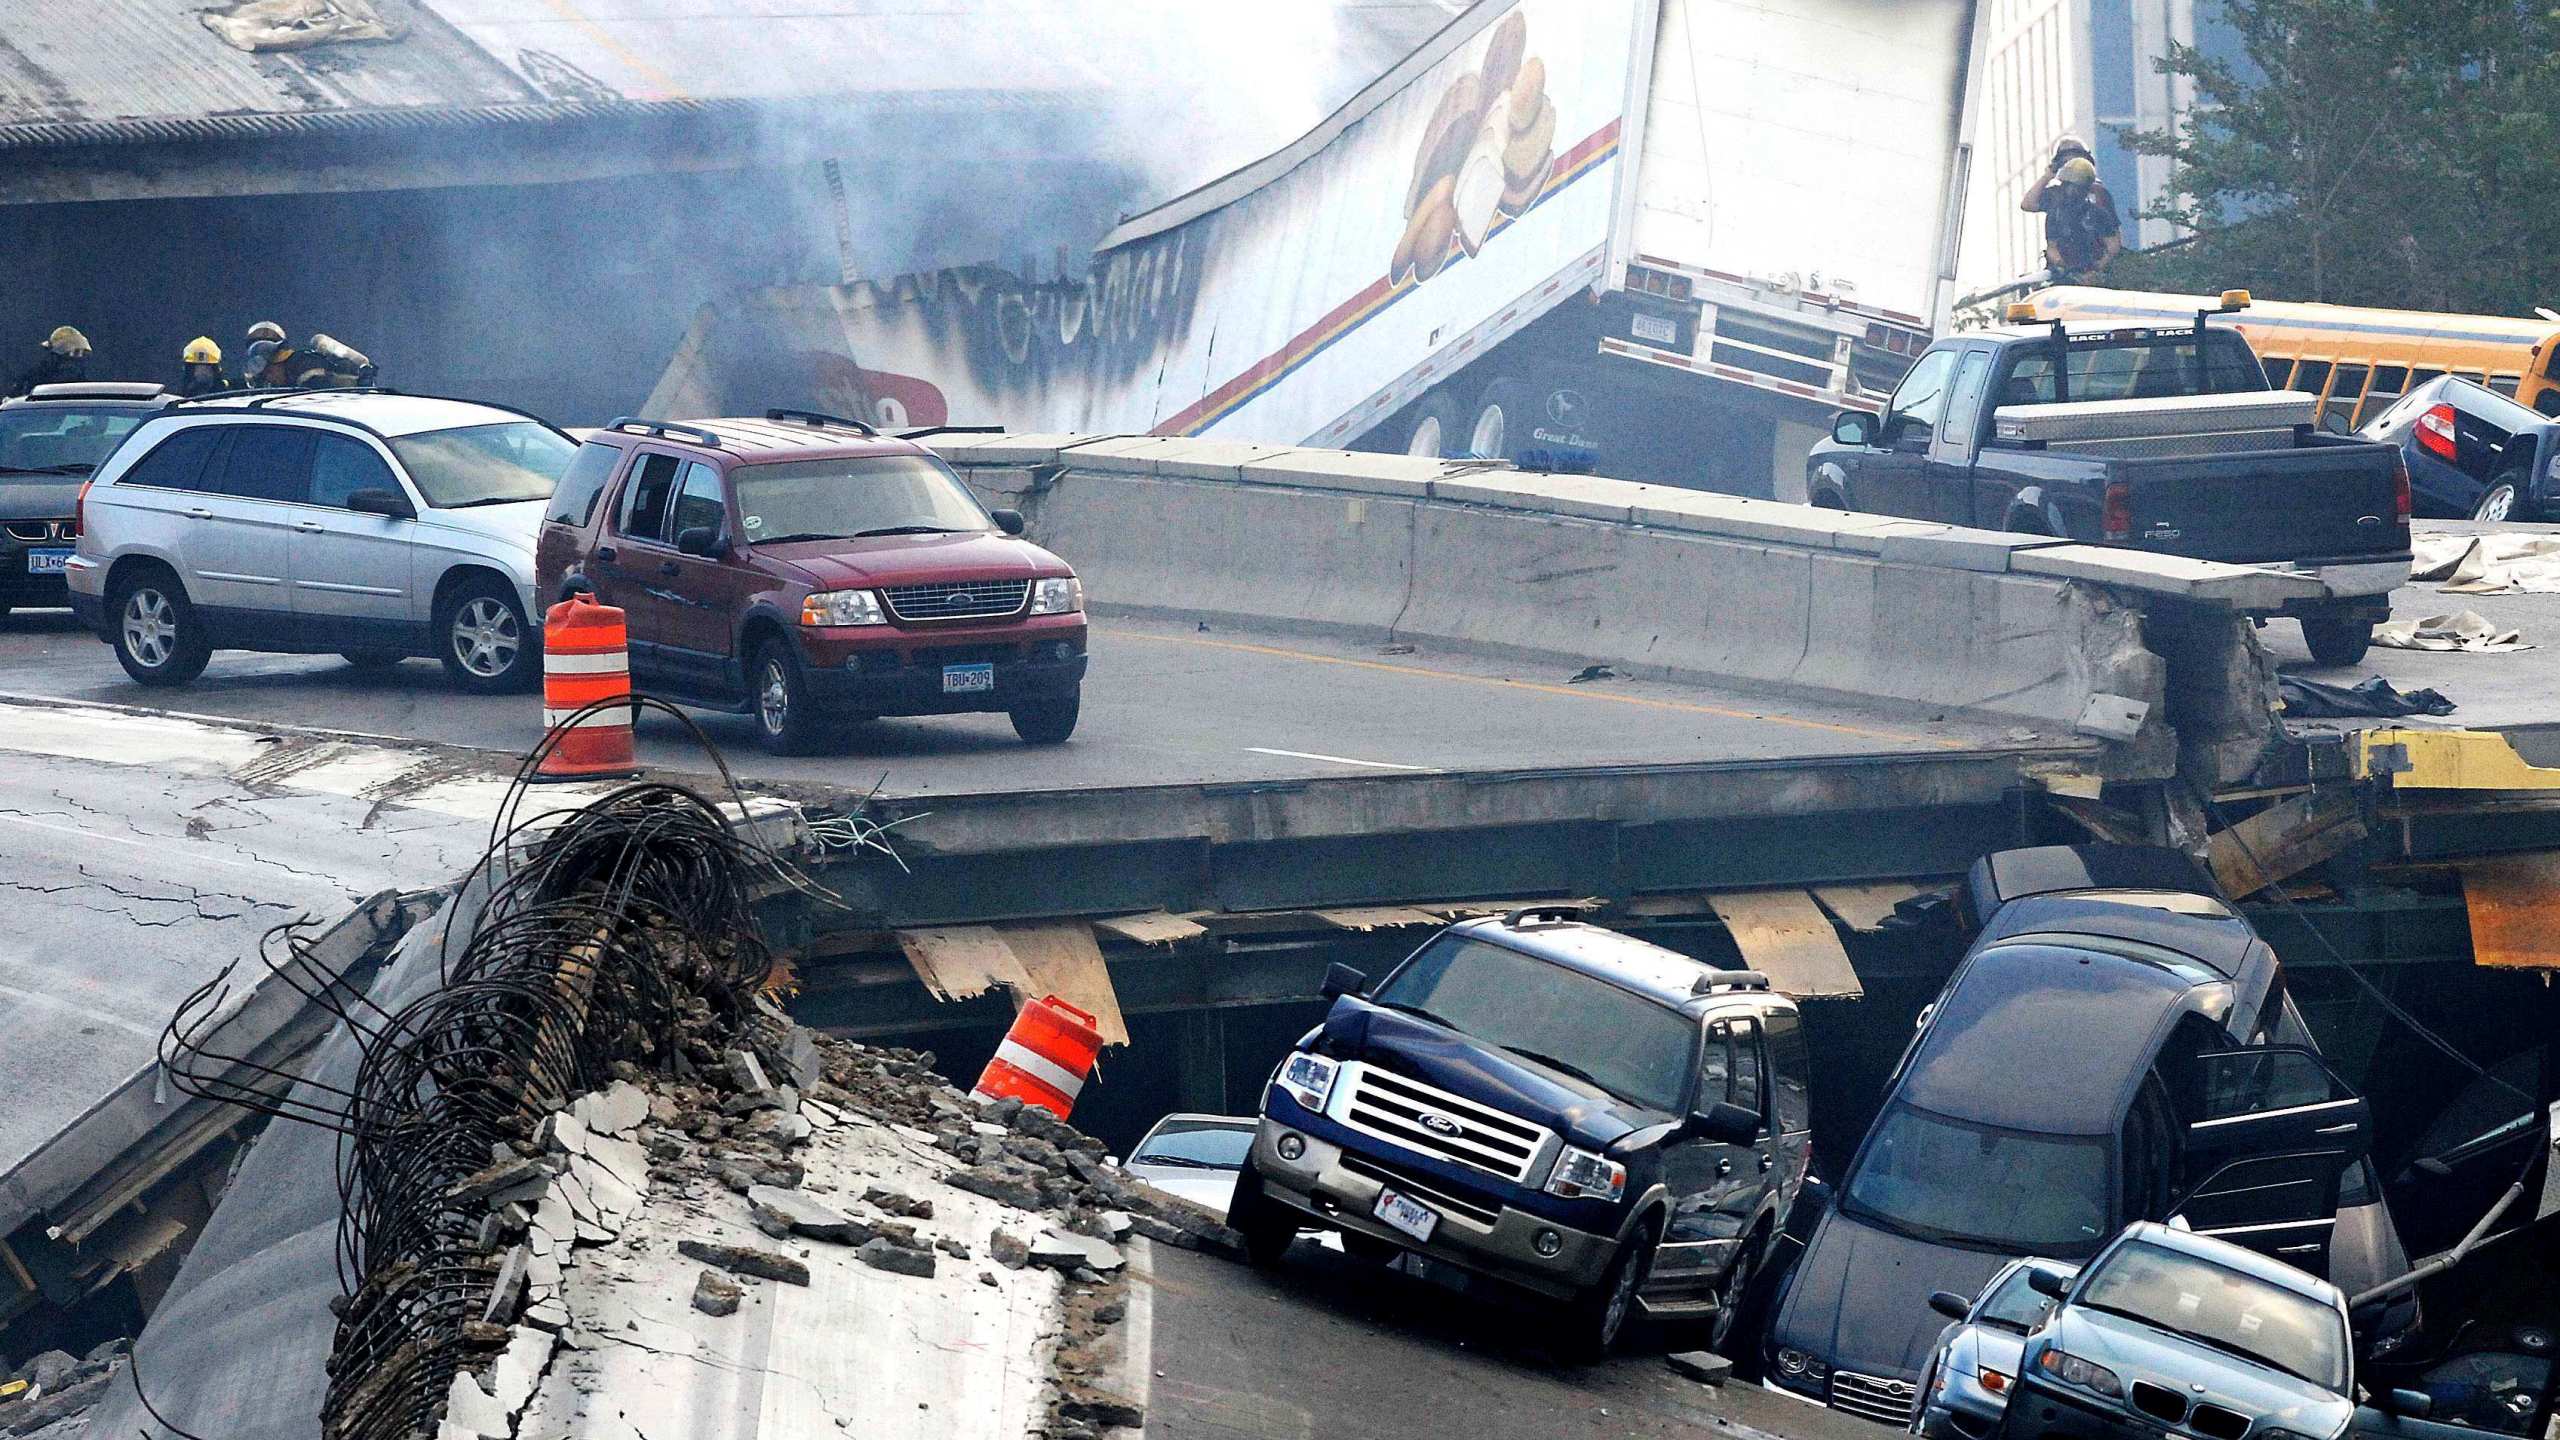 FILE - In this Wednesday, Aug. 1, 2007 picture, vehicles are scattered along the broken remains of the Interstate 35W bridge, which stretches between Minneapolis and St. Paul, after it collapsed into the Mississippi River during evening rush hour. The collapse of the Francis Scott Key Bridge in Baltimore following a ship strike on March 26, 2024 brought back jarring memories of their own ordeals to people who survived previous bridge collapses. (Stacy Bengs/The Minnesota Daily via AP)